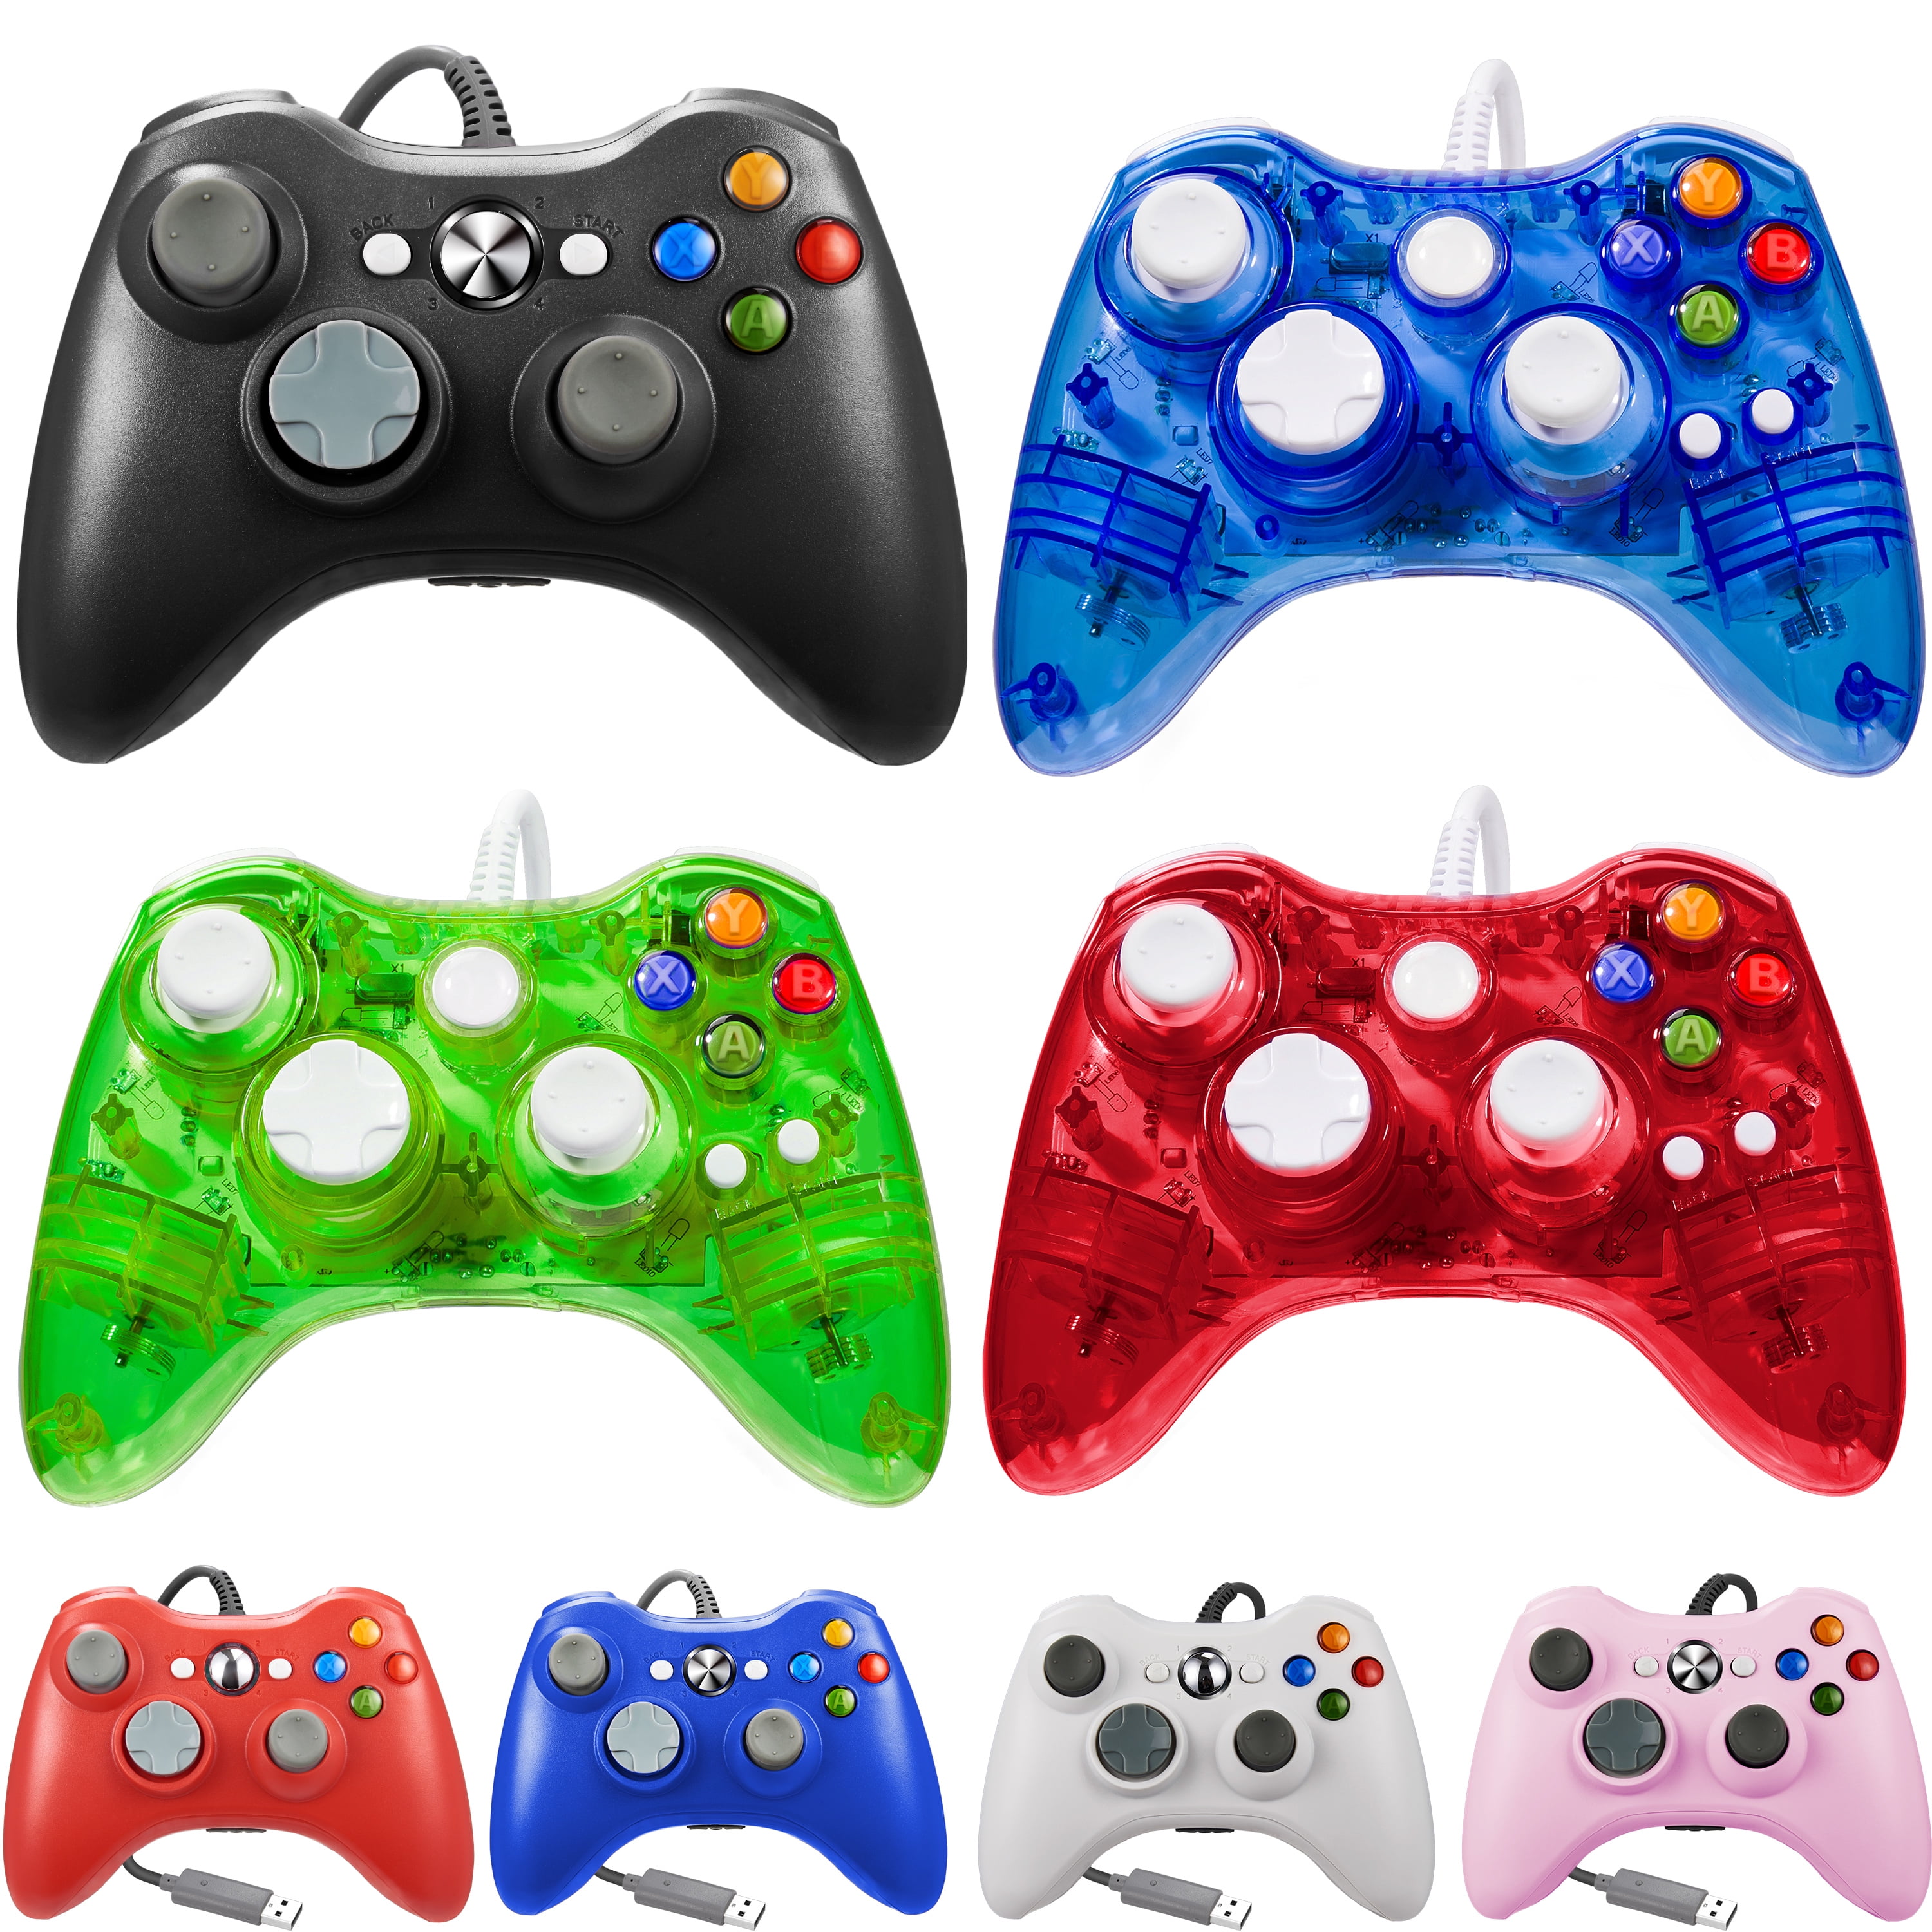 Rhythmic assistant Formulate Luxmo Wired Xbox 360 Controller Gamepad Joystick Compatible with Xbox 360 / PC/ Windows 7 8 10 - Walmart.com